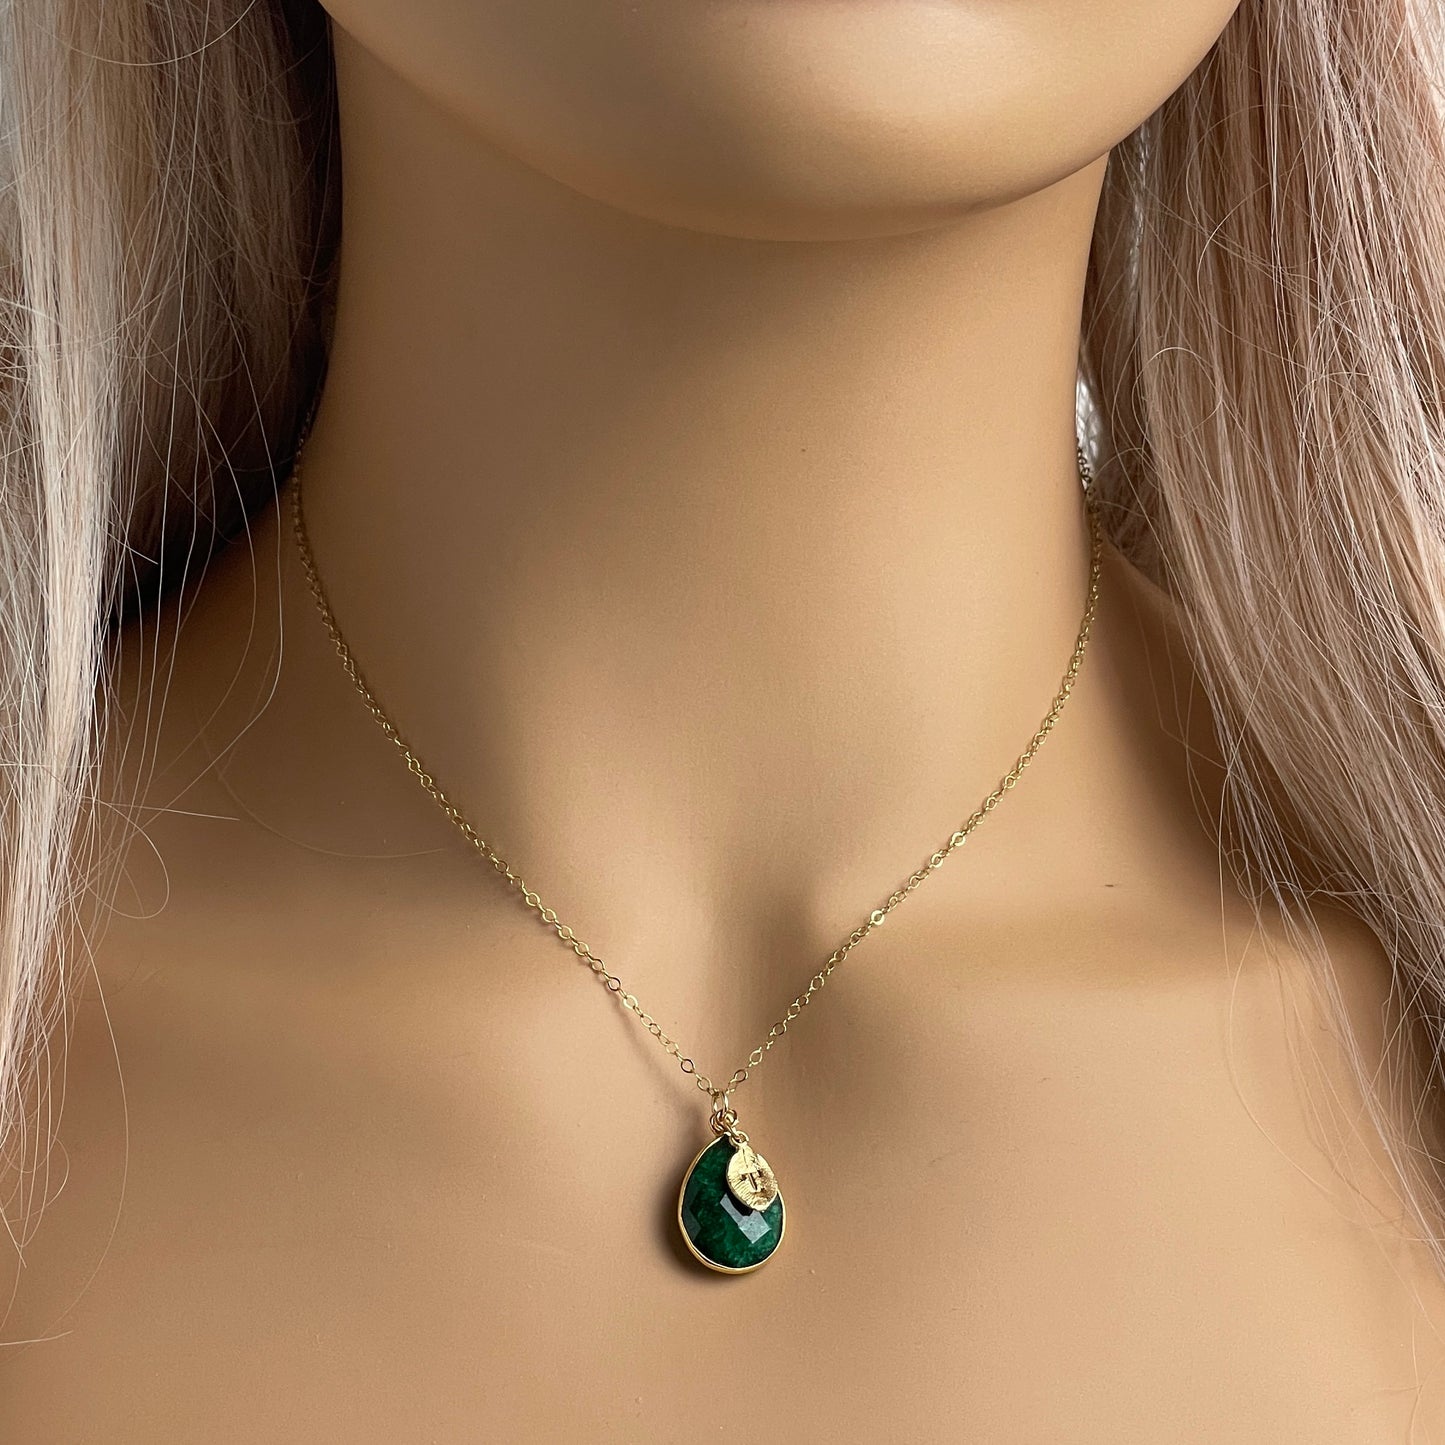 Green Emerald Gemstone Necklace Gold with Personalized Initial, Gifts For Mom, M1-02